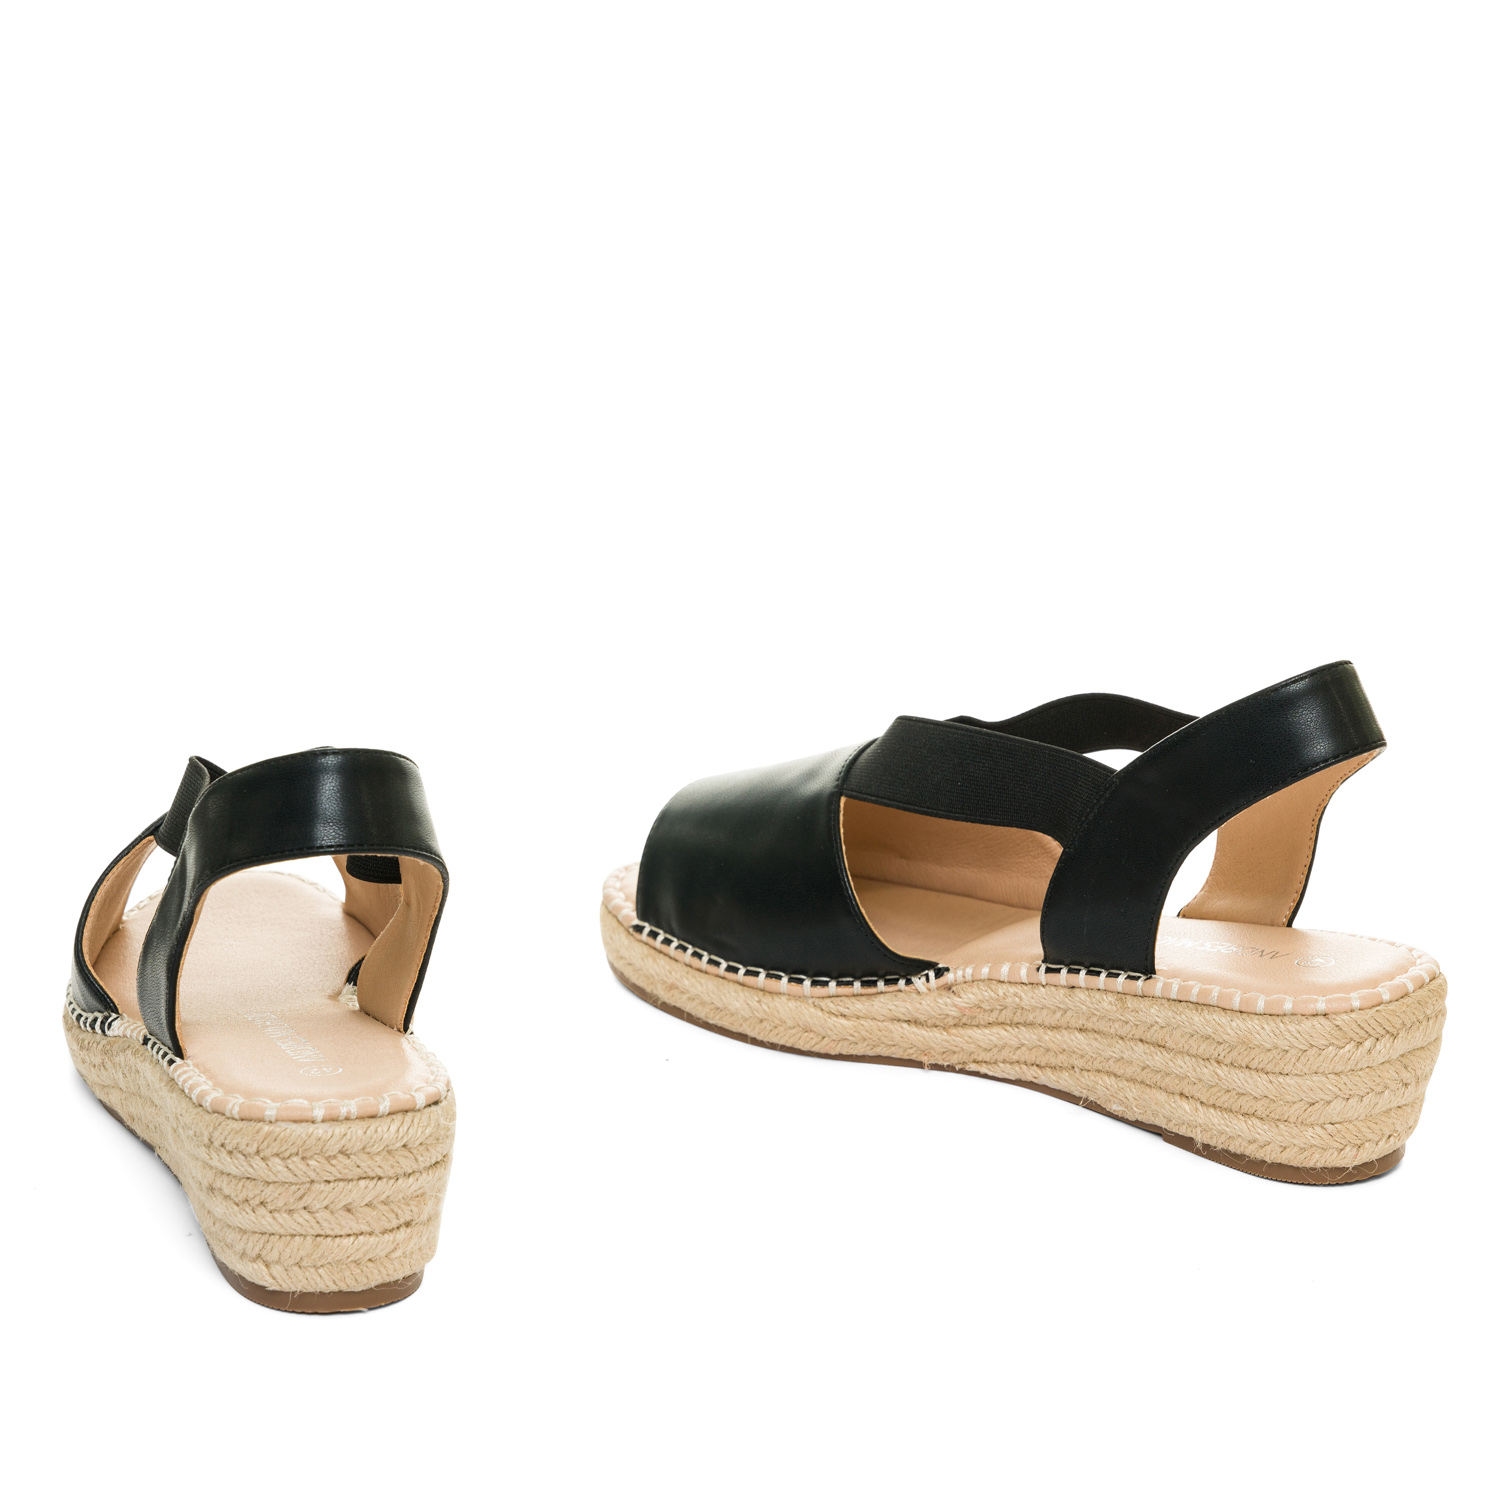 Black faux leather sandals with jute wedge 